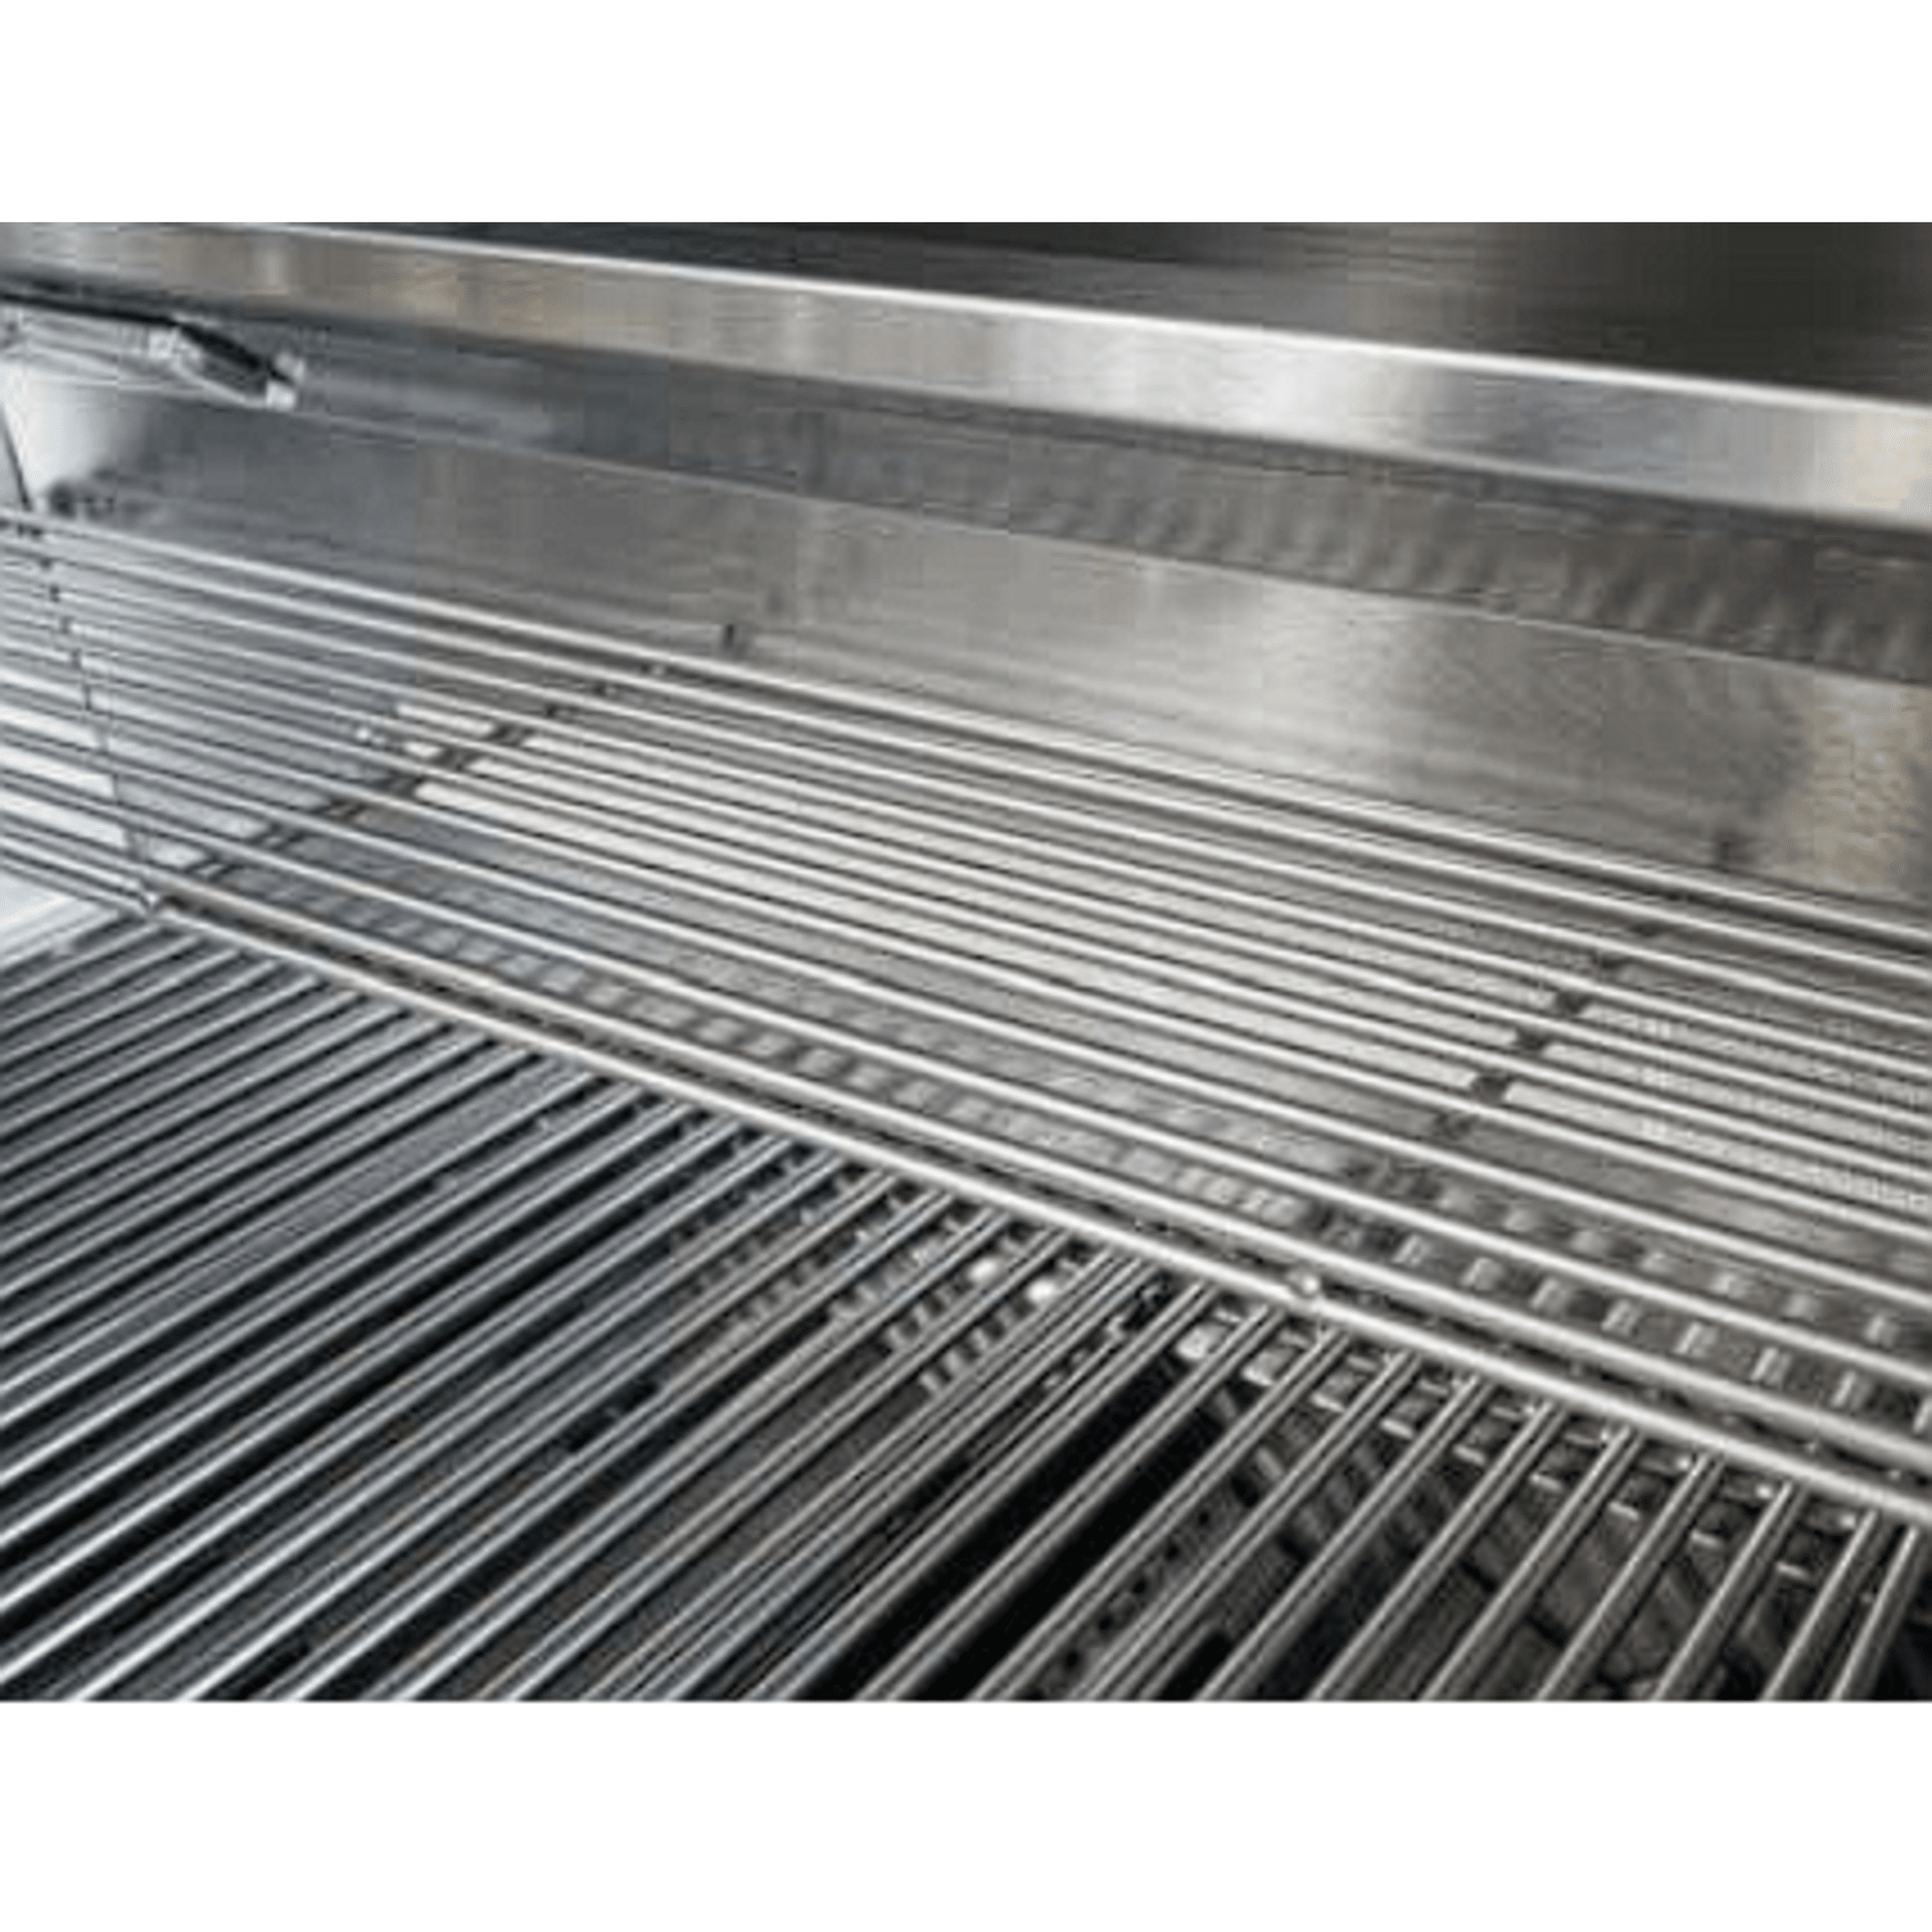 Broilmaster B-Series 40" 5-Burner Stainless Steel Natural Gas Grill Head With Built-In Infrared Burner and Cooking Lights